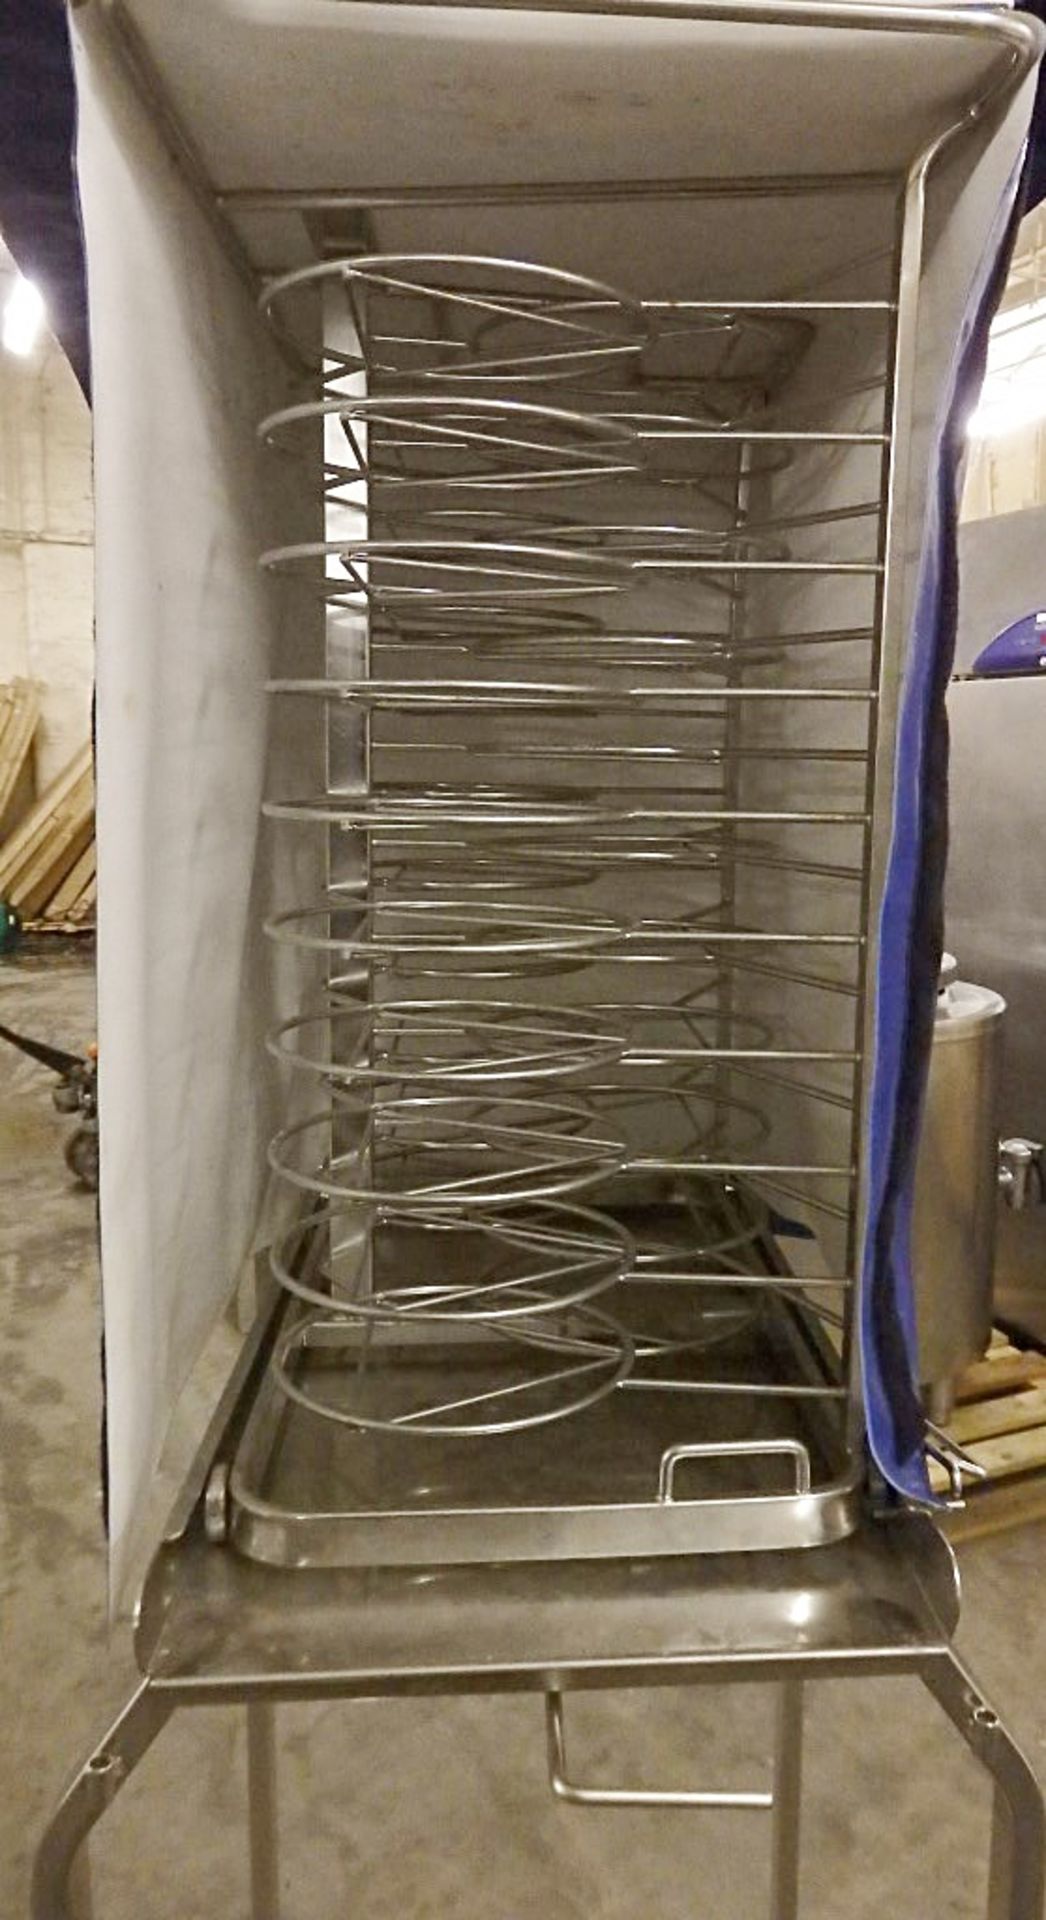 1 x Stainless Steel Plate Rack / Trolley With Thermal Cover -  Only Used Once Before - 31 Plate - Image 2 of 7